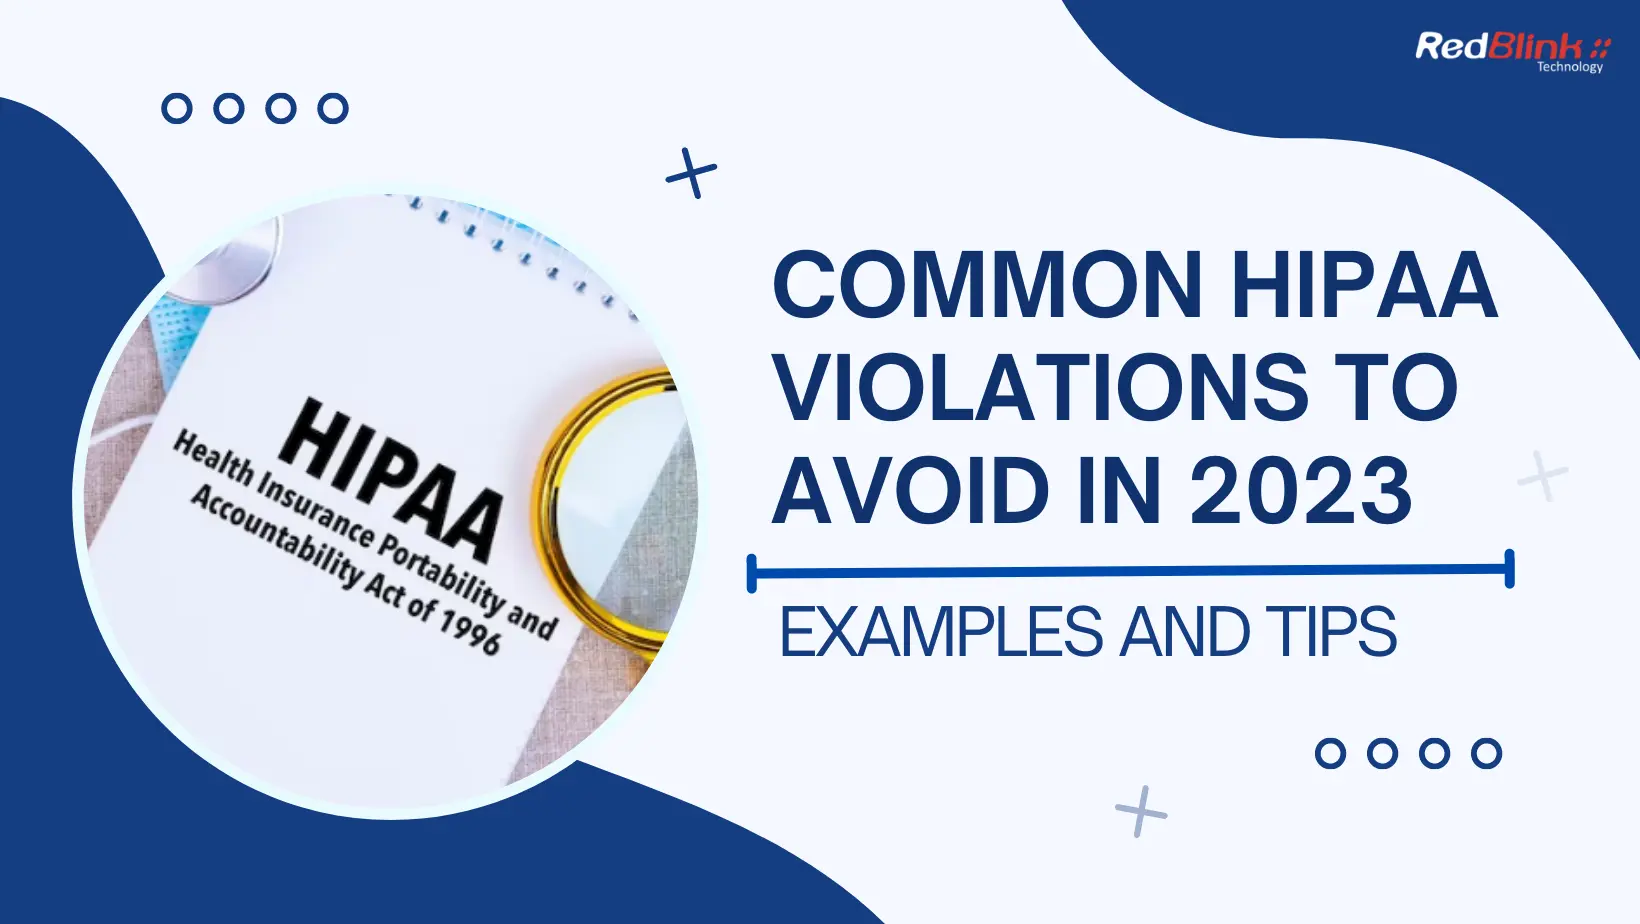 Common HIPAA Violations to Avoid in 2023